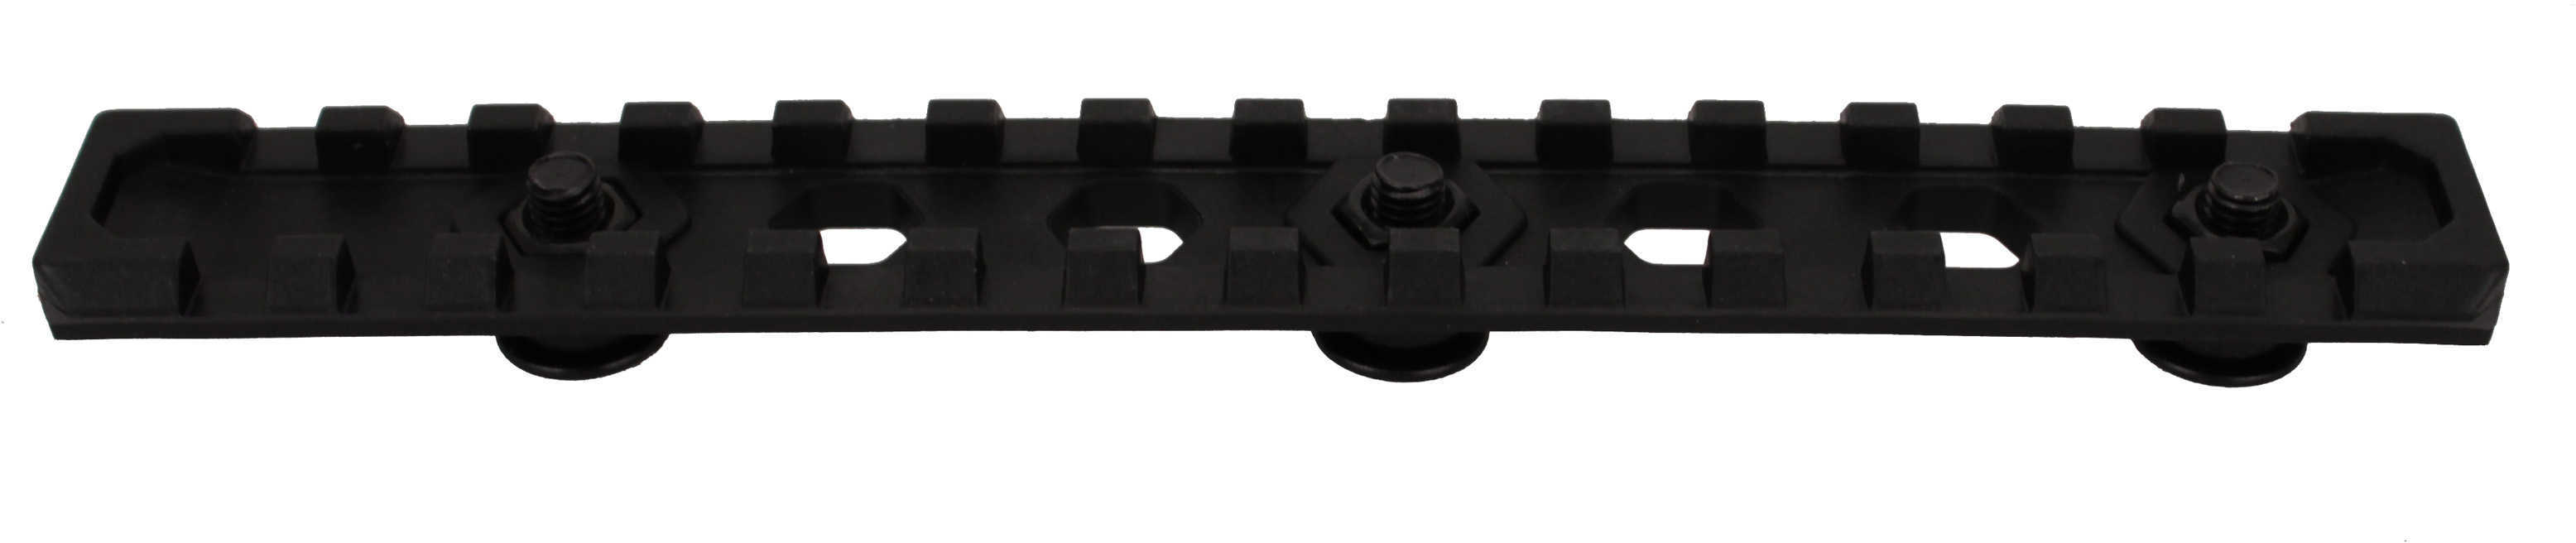 ProMag AR-15 Rifle & M4 Carbine Forend Rail - Black Picatinny attaches to the using 3 scr PM003B